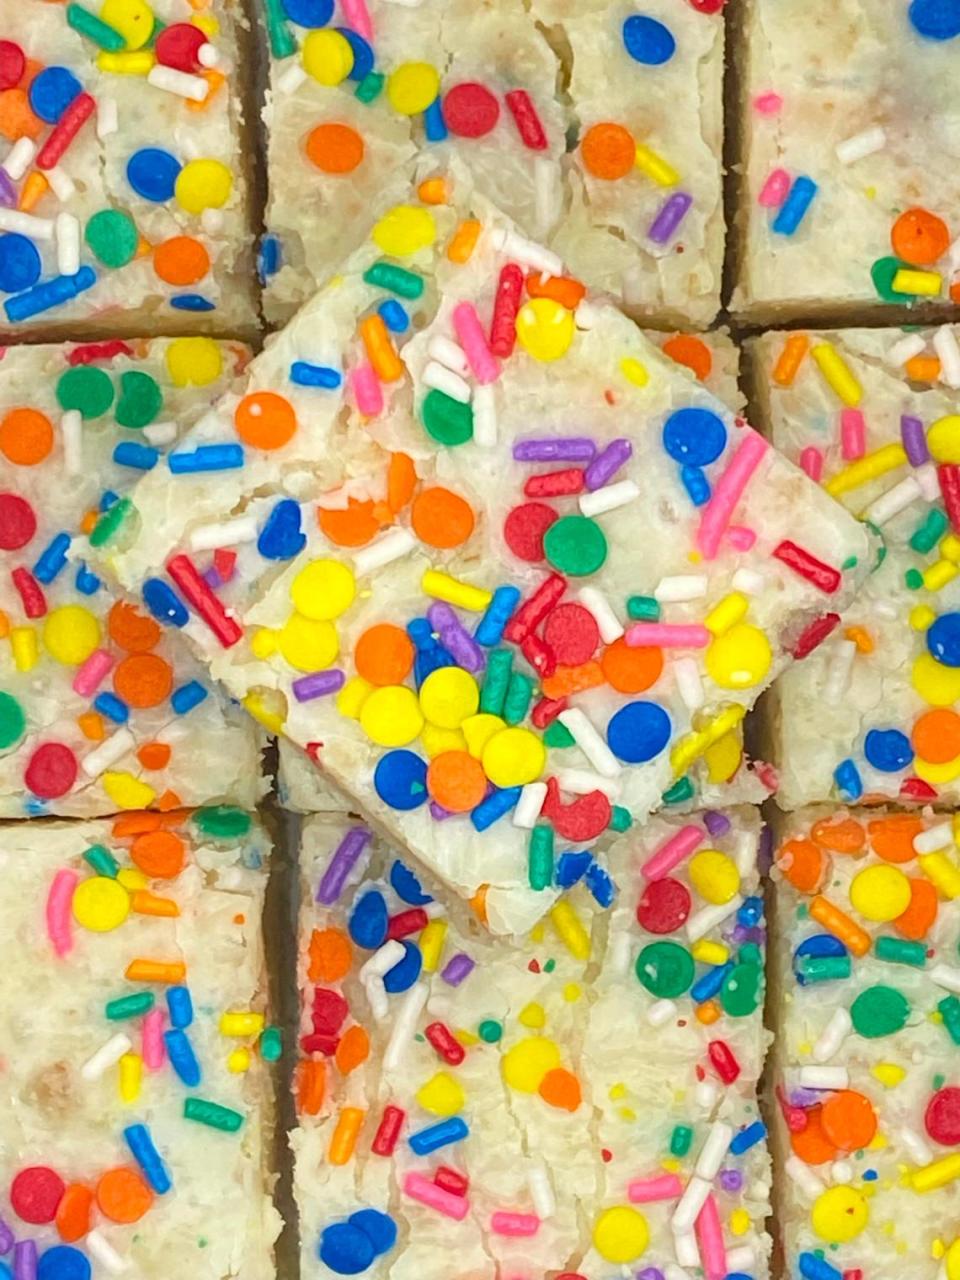 Dahlhus Fudge flavors include Marilyn Monroe, made with funfetti cake pieces and sprinkles.